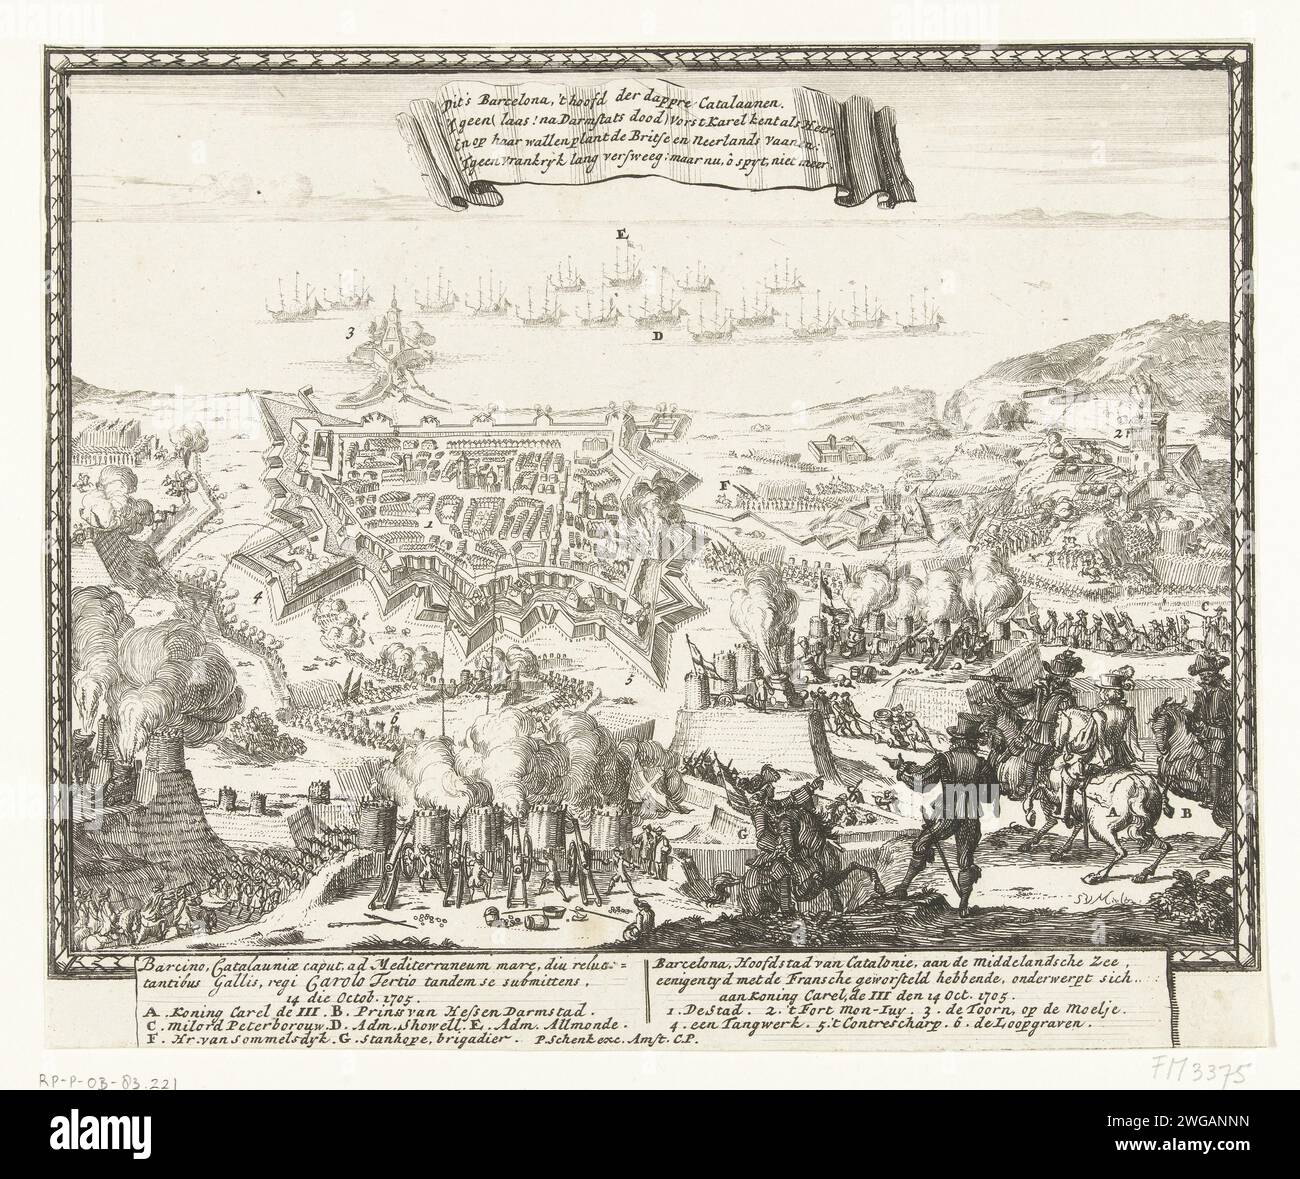 Barcelona submits to King Charles III, 1705, 1705 print After a siege by the Allies, Barcelona submits to King Charles III, October 14, 1705. In the caption De Titels in Latin and Dutch and the legends. print maker: Northern Netherlandspublisher: Amsterdam paper etching capture of city (after the siege) Barcelona Stock Photo